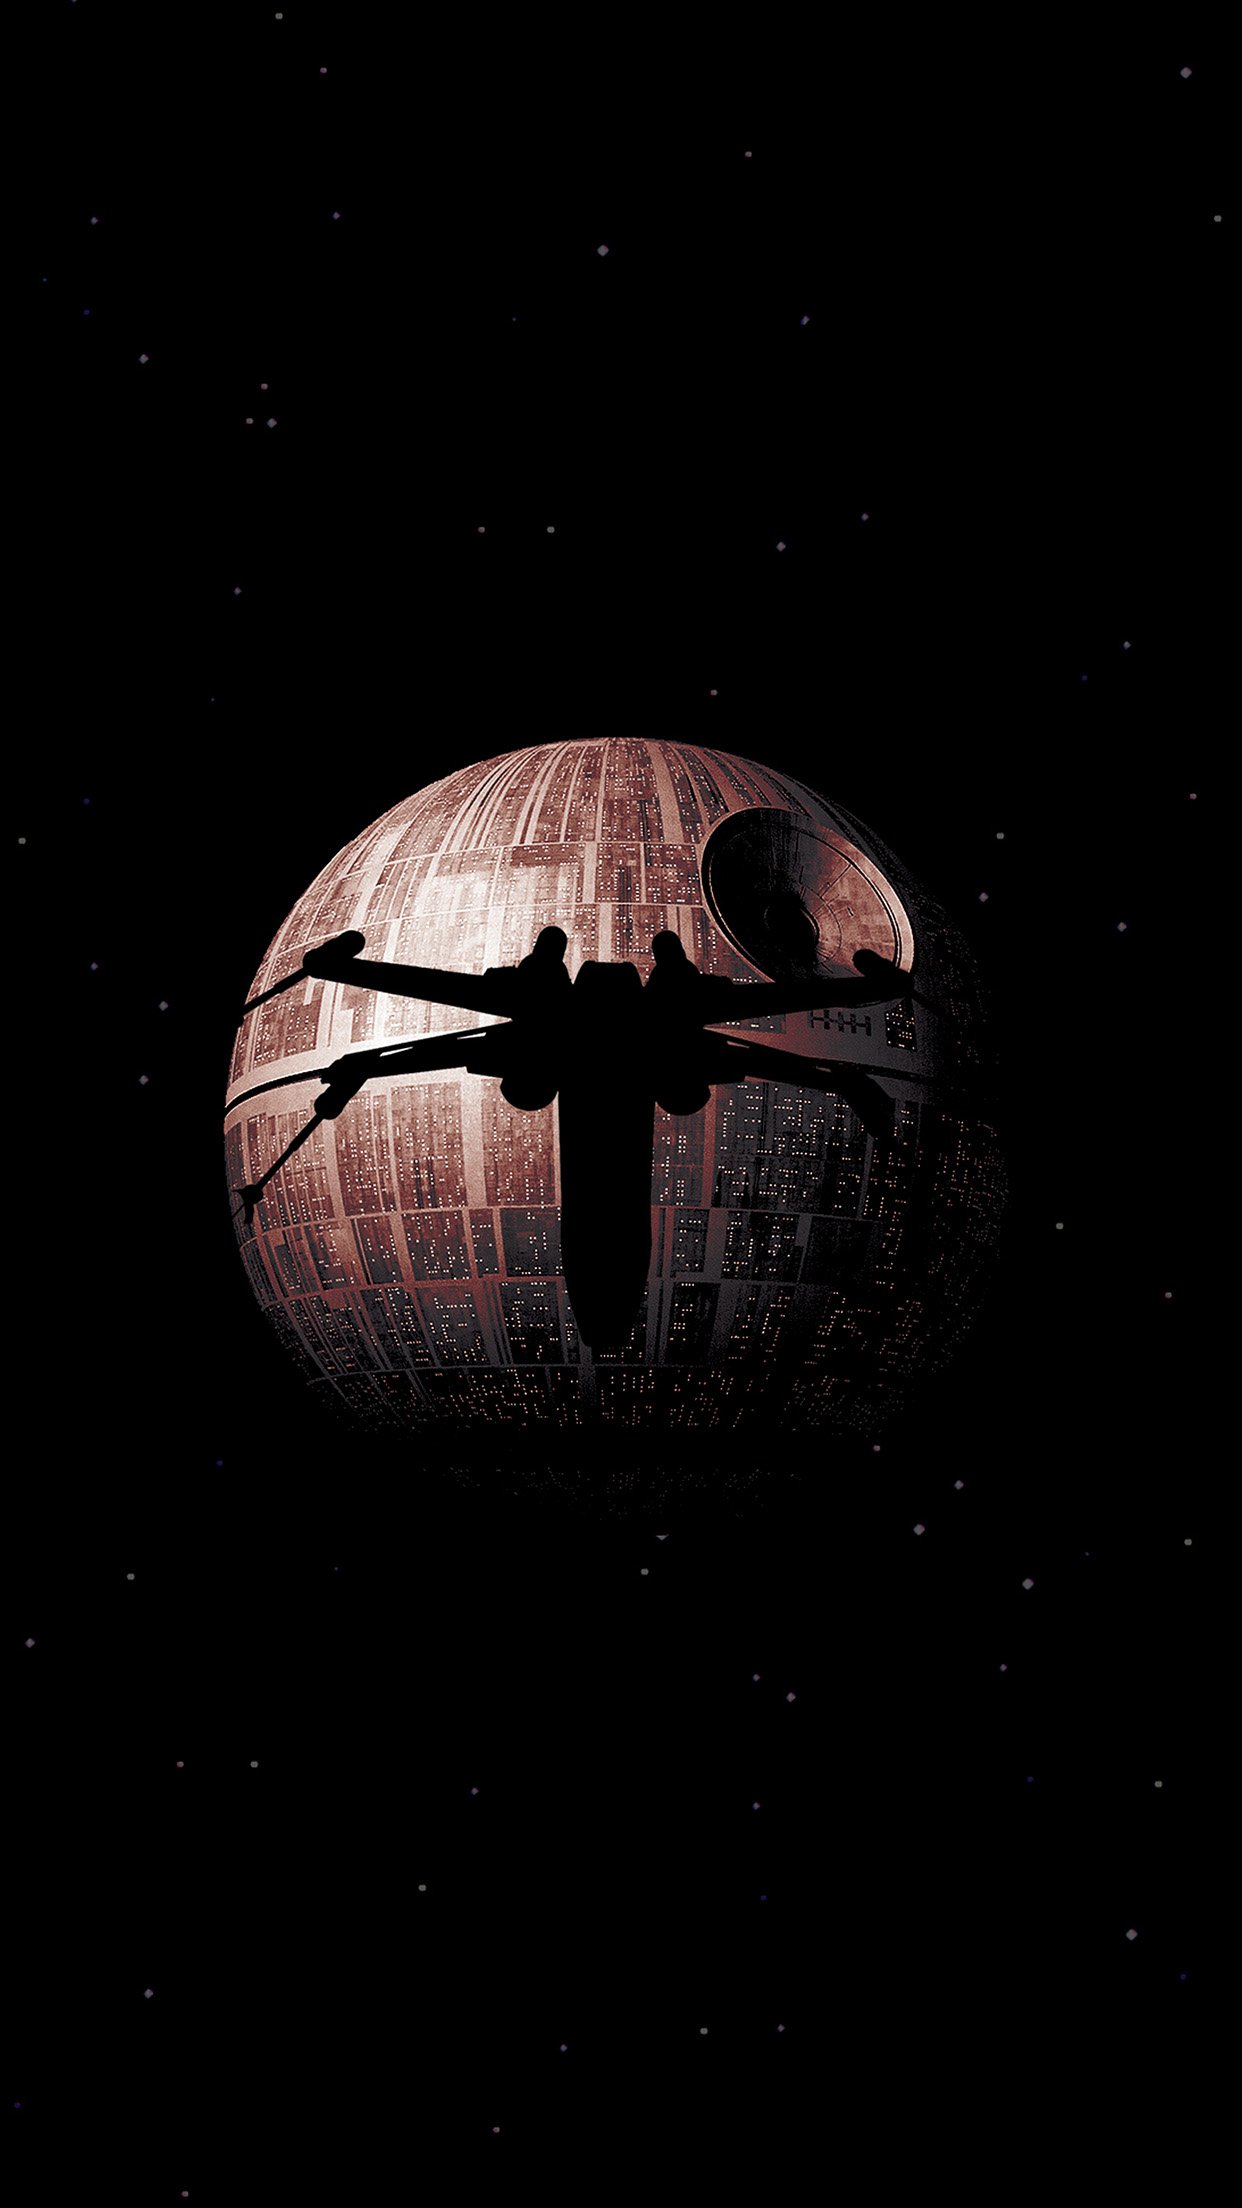 Rogue One Dark Space Starwars Poster Illustration Art Android wallpaper